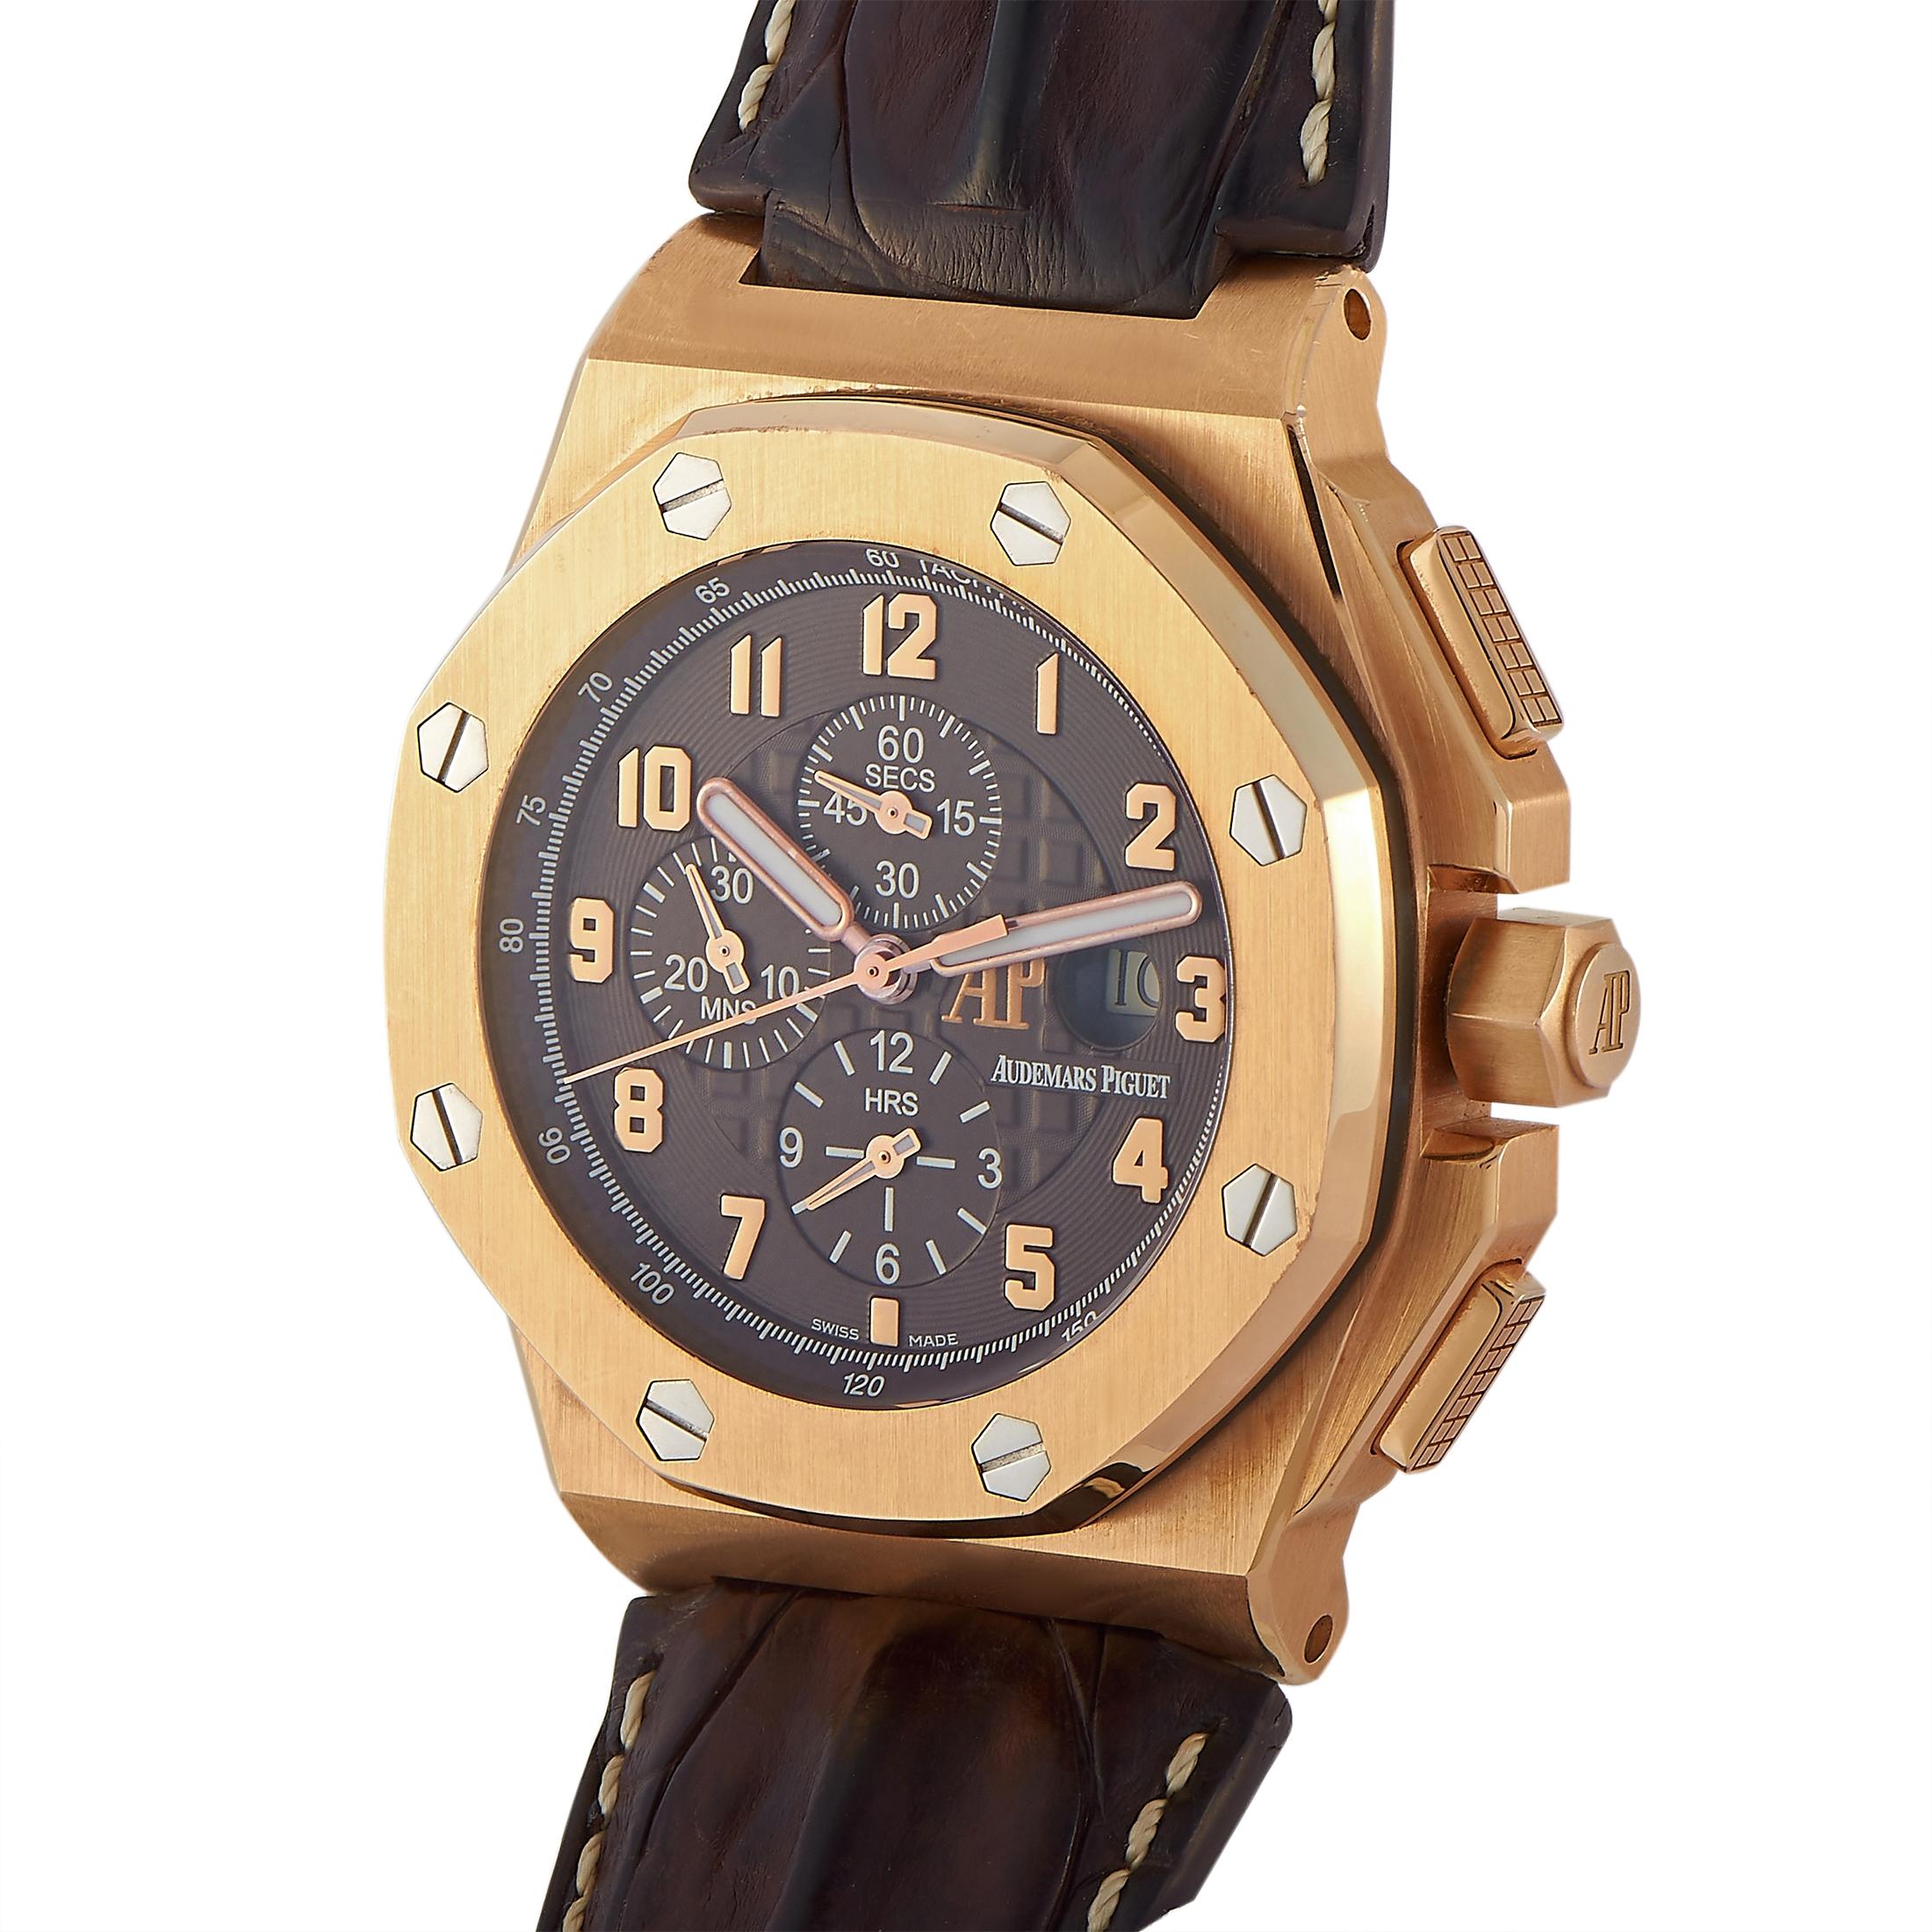 Treat someone you love to this limited edition Audemars Piguet Royal Oak Offshore Men's Chronograph Watch 26158OR.OO.A801CR.01. Designed in honor of Arnold Schwarzenegger's After-School All Stars Foundation, this timepiece displays a heavy-duty,